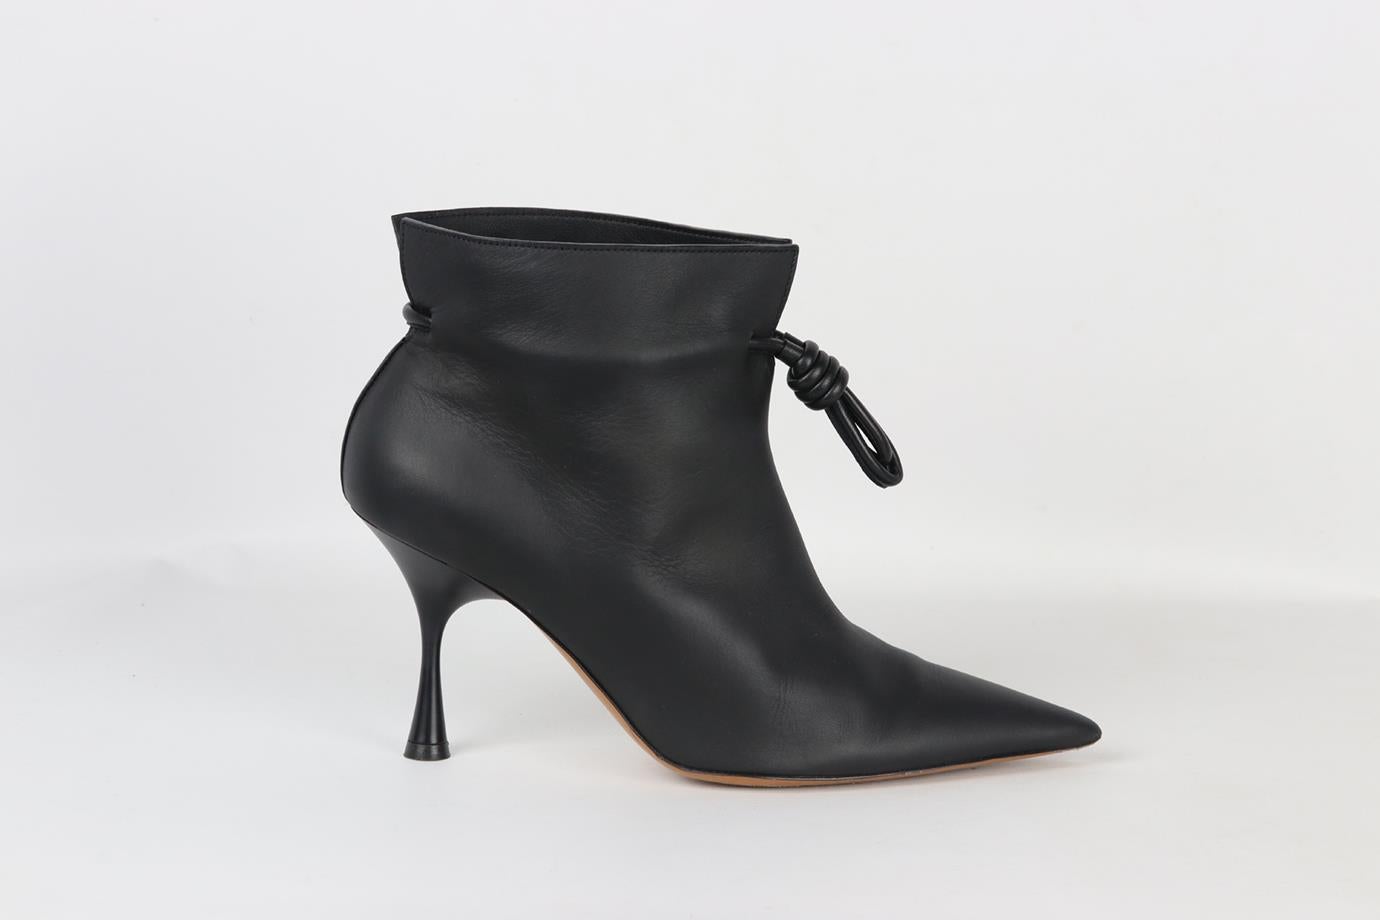 Loewe leather ankle boots. Black. Pull on. Does not come with dustbag or box. Size: EU 39 (UK 6, US 9). Insole: 9.8 in. Heel Height: 2.5 in. Very good condition - Some wear to soles and toe. Light creasing to upper material; see pictures.
